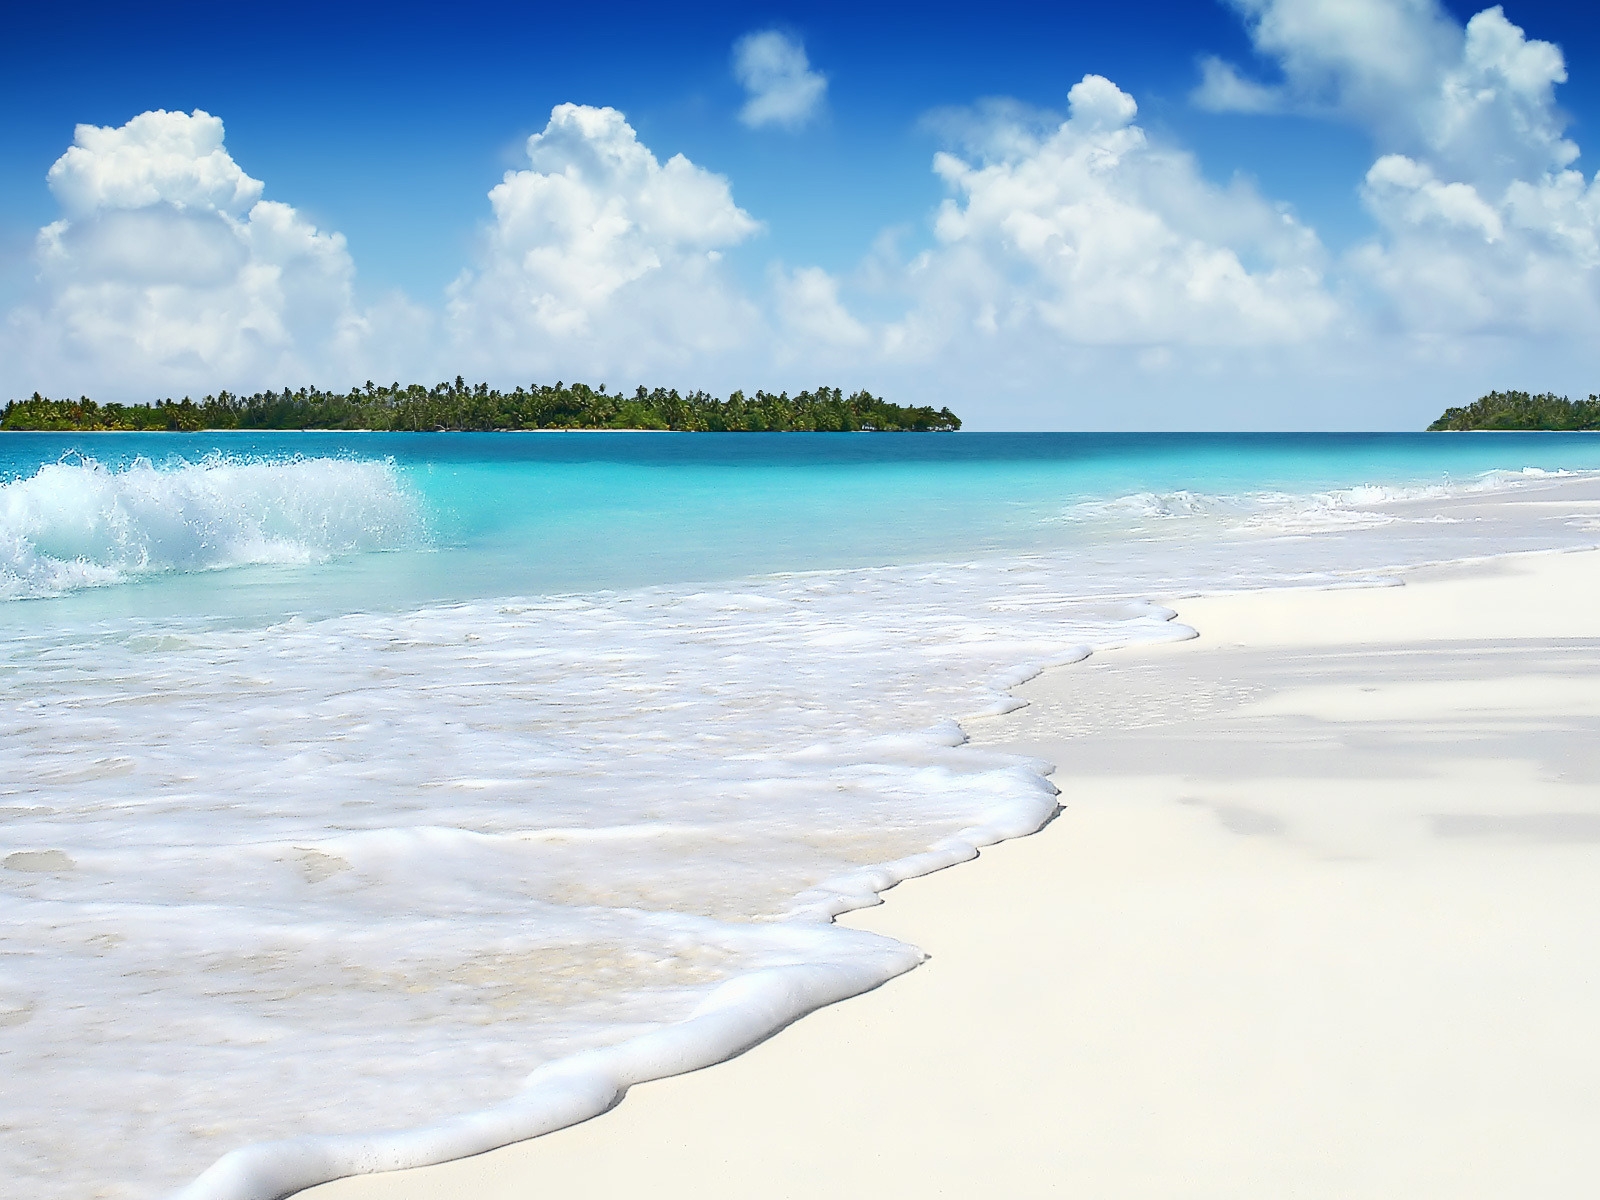 The Beautiful Summer Island for 1600 x 1200 resolution